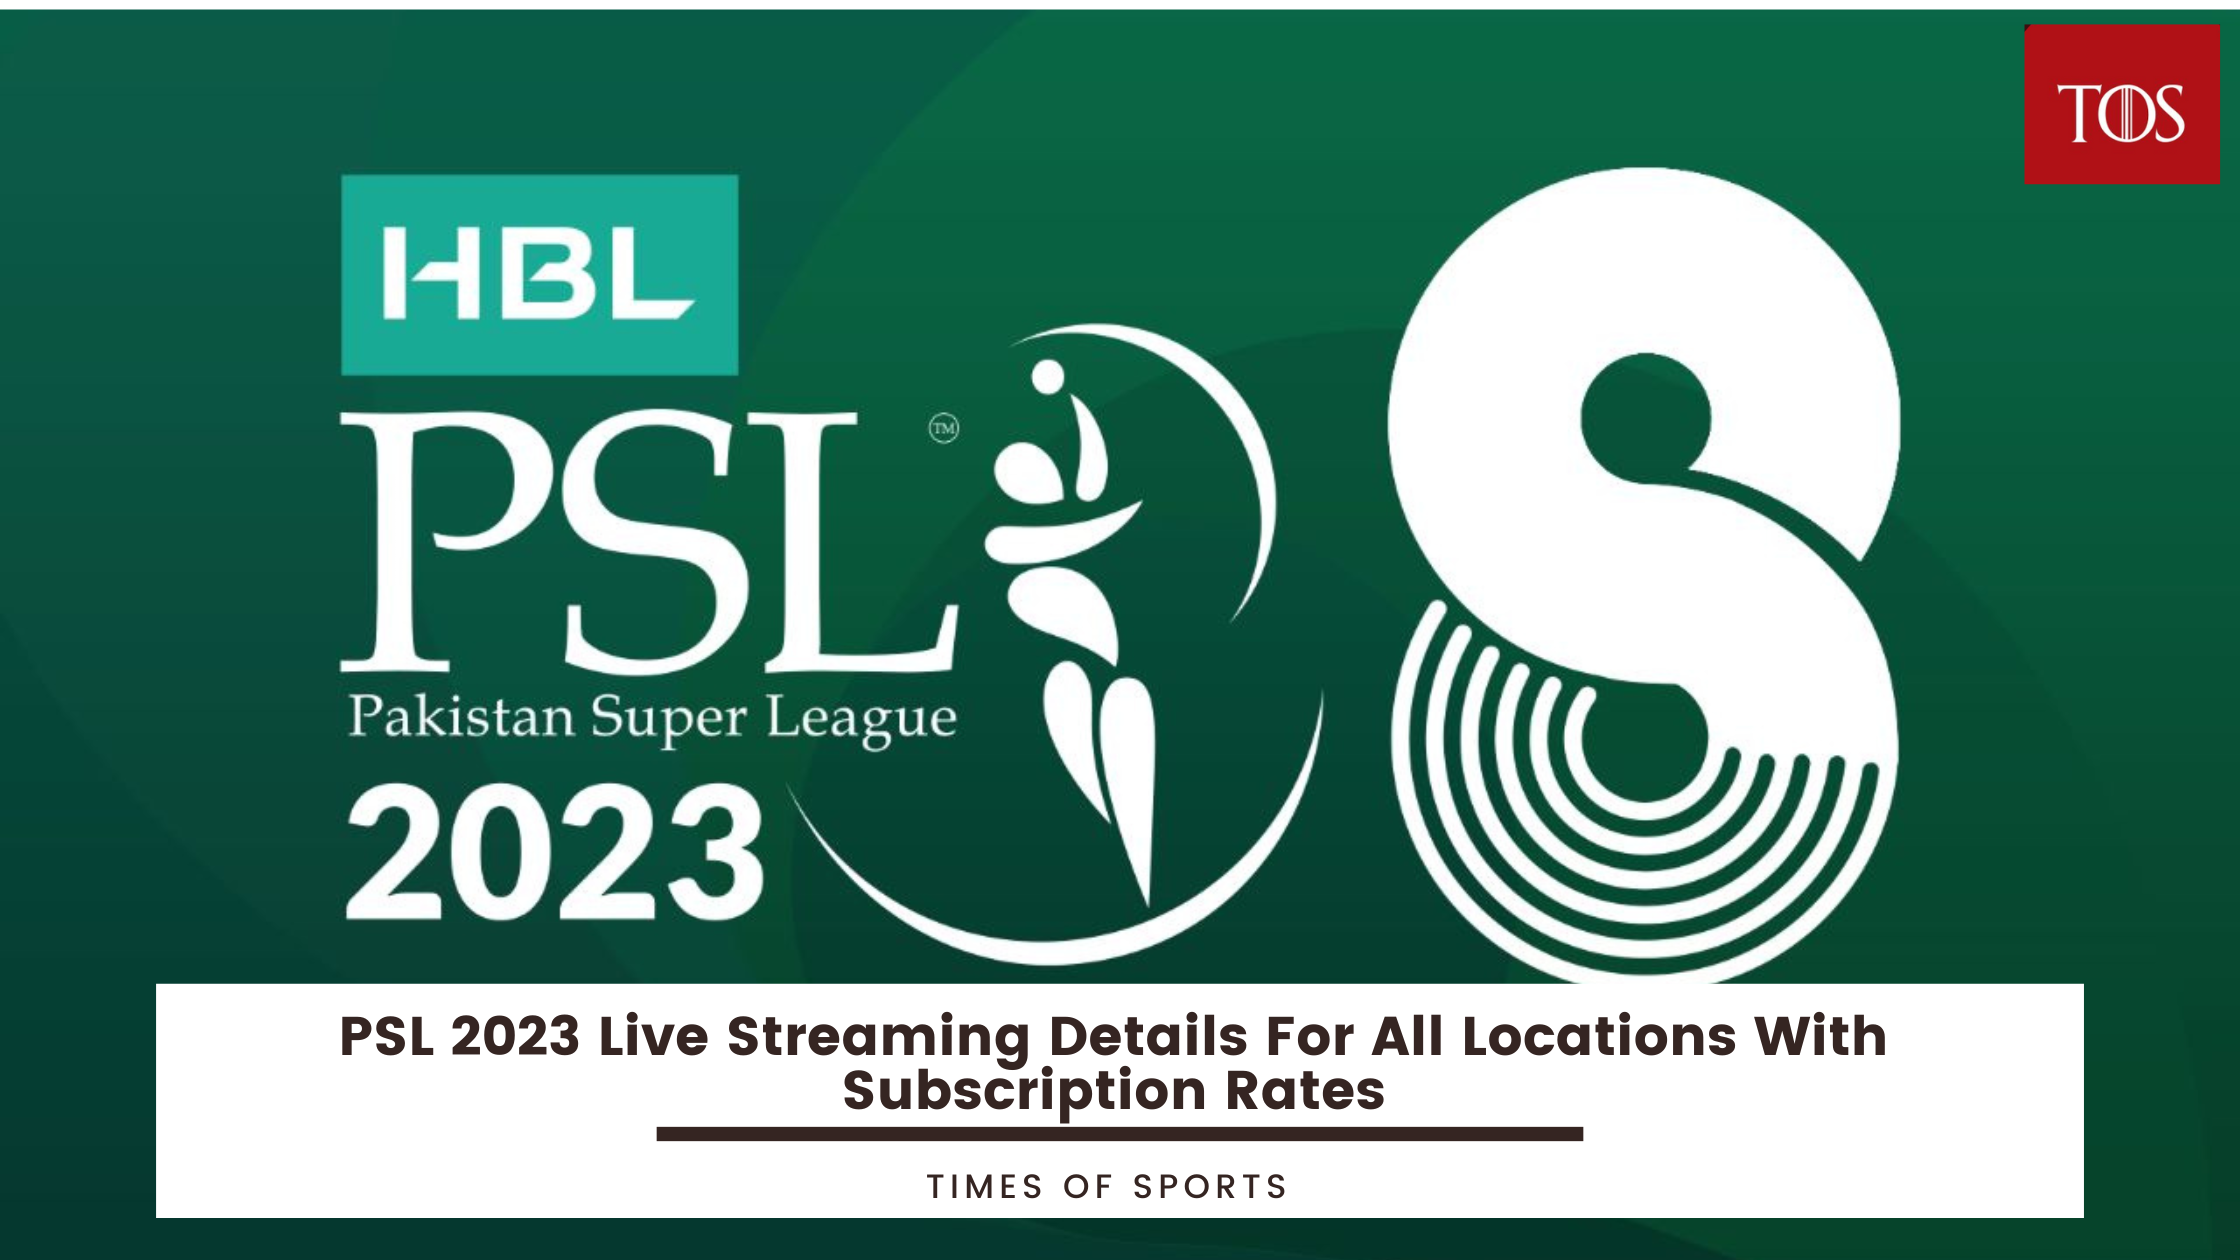 PSL 2023 Live Streaming Details For All Locations